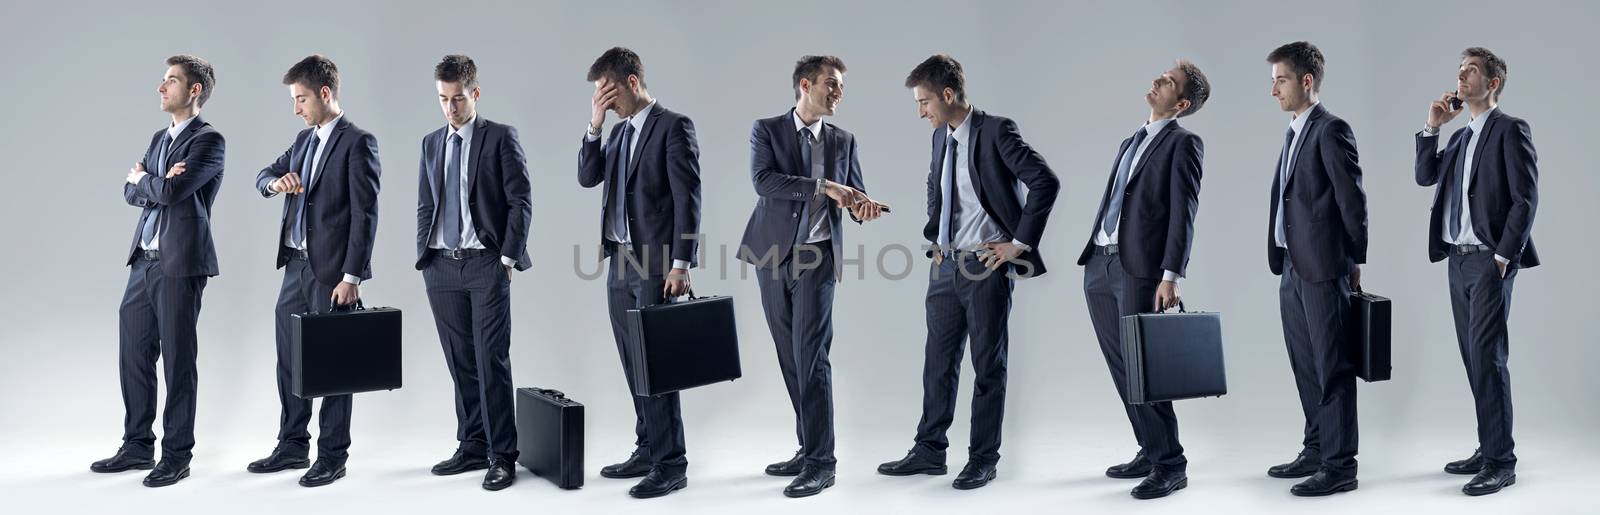 Businessman set of poses by stokkete